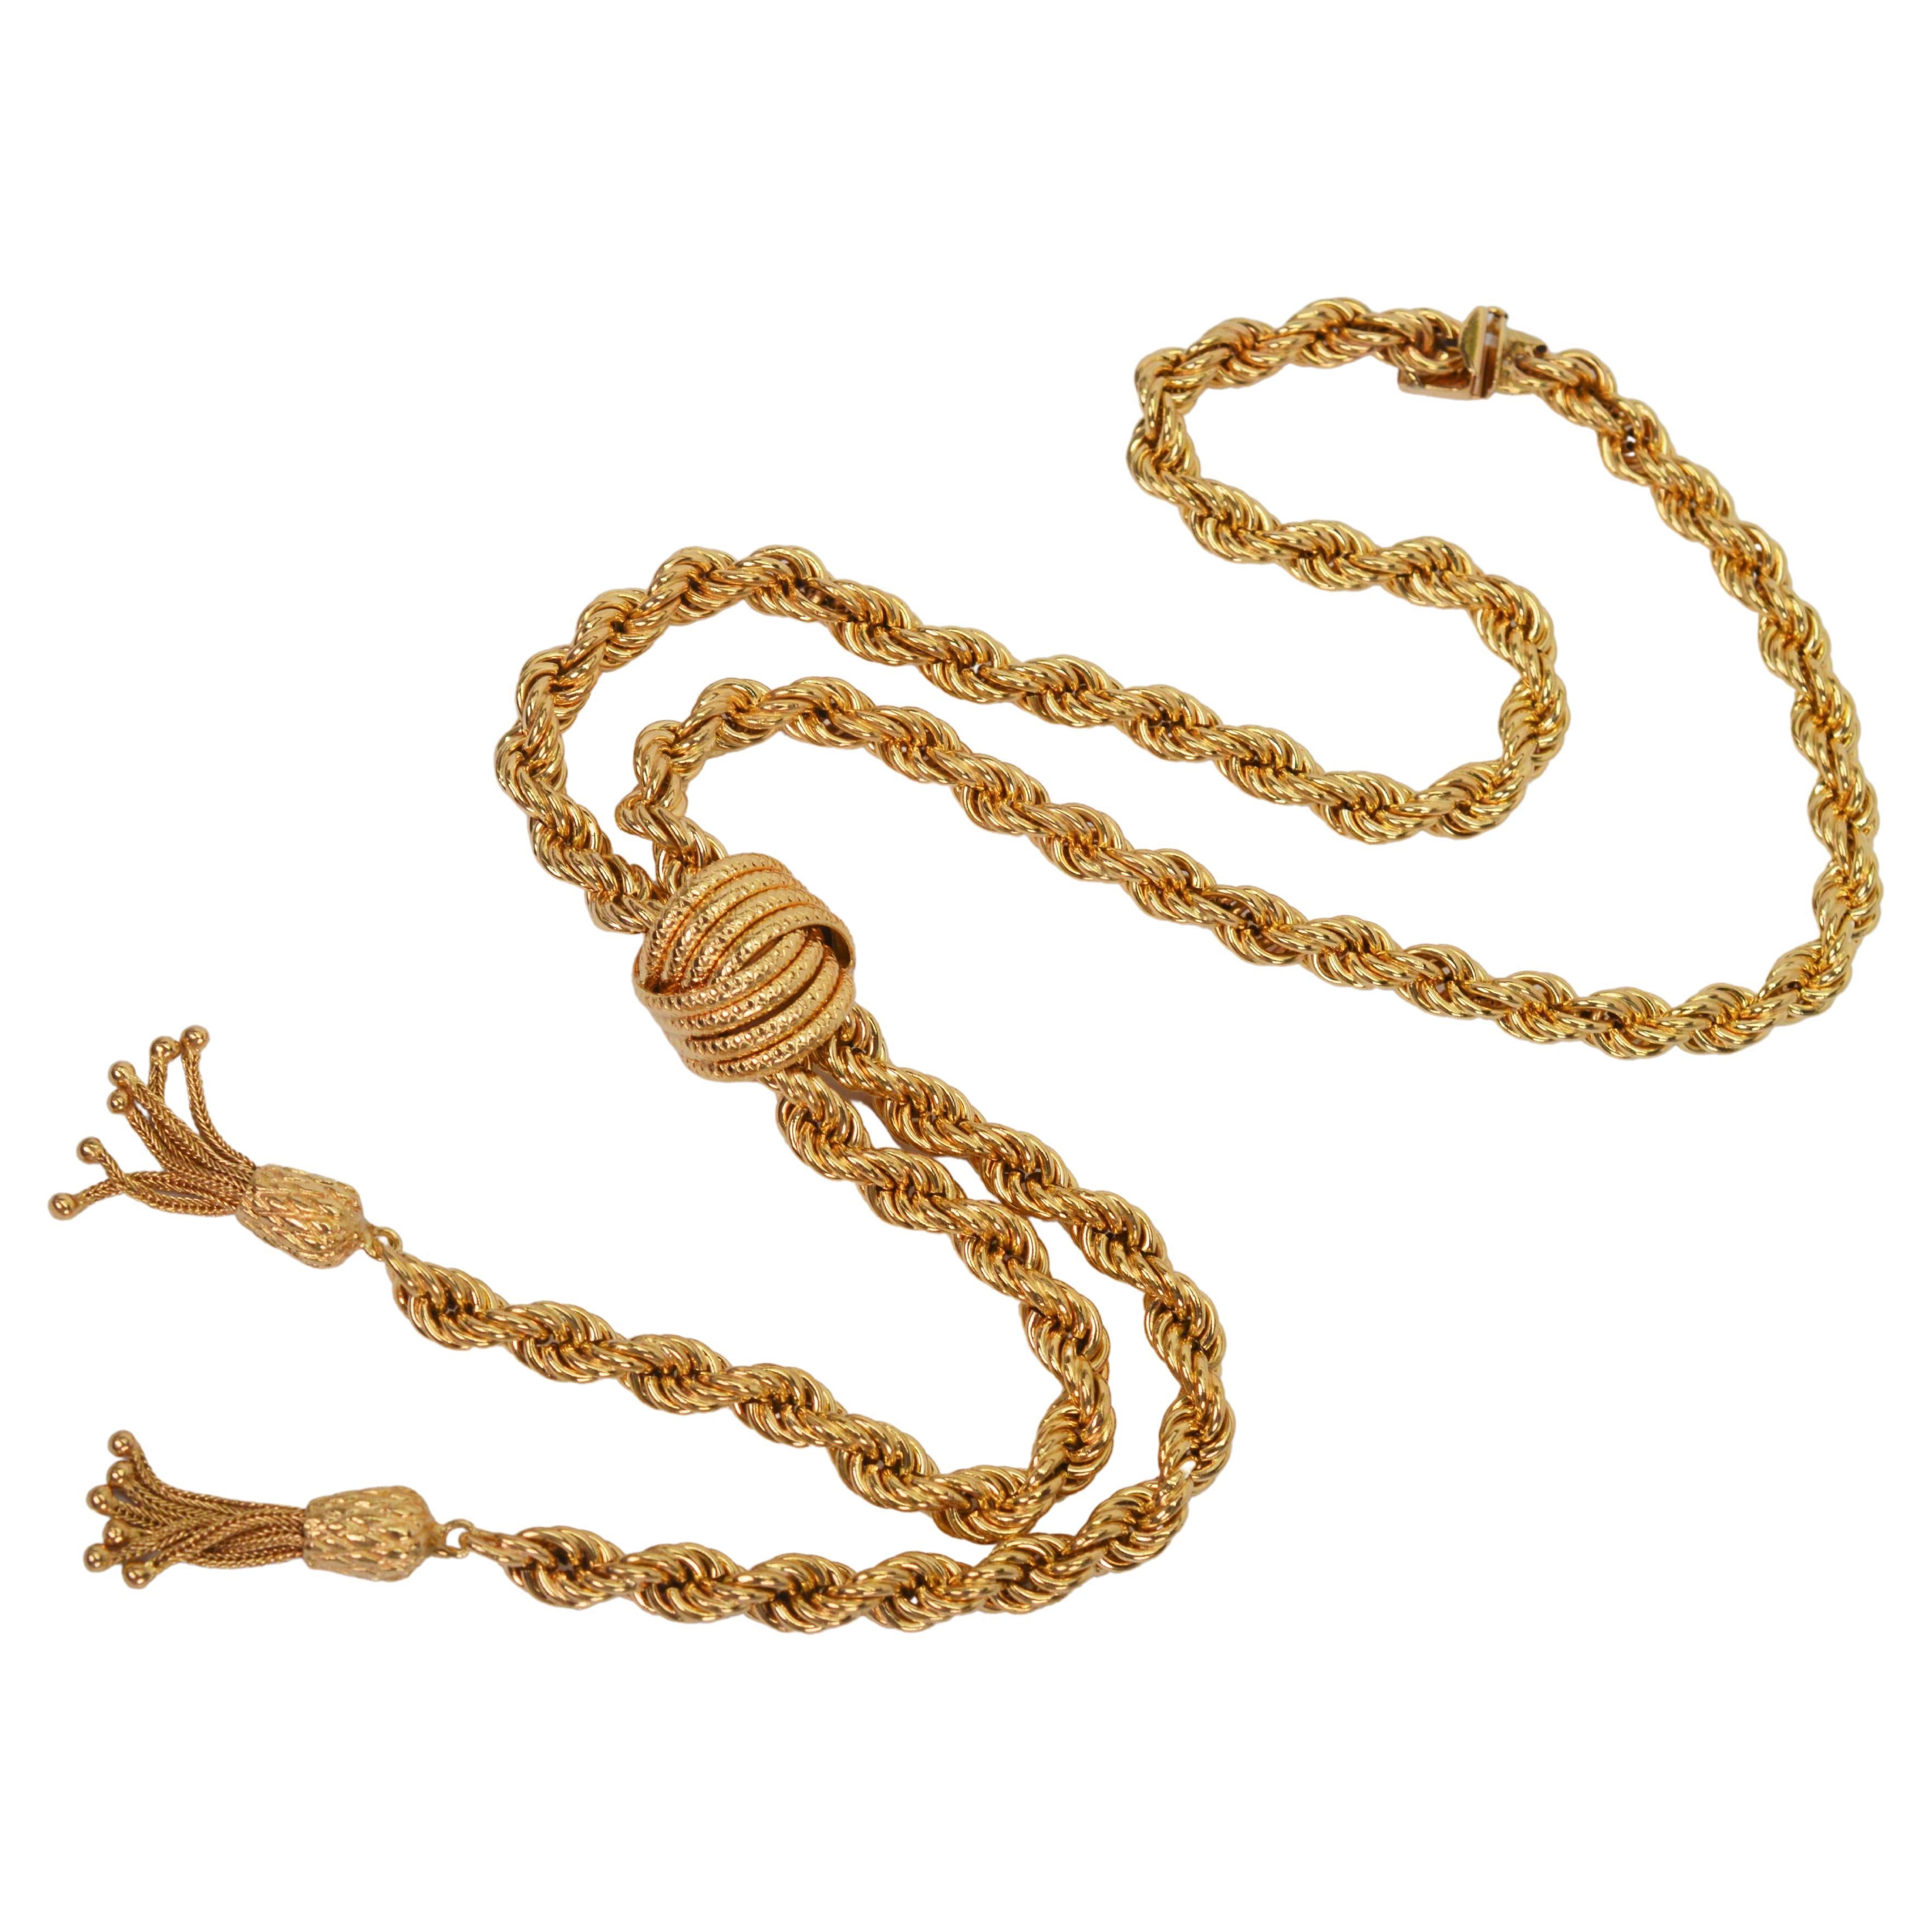 Fashionable and bright, this bold fourteen 14 karat yellow gold necklace is the perfect accessory to dress up a starched collared blouse, fine gauge sweater or classic dress.
Generously styled gold rope at a thickness of approximately 6.5 mm is